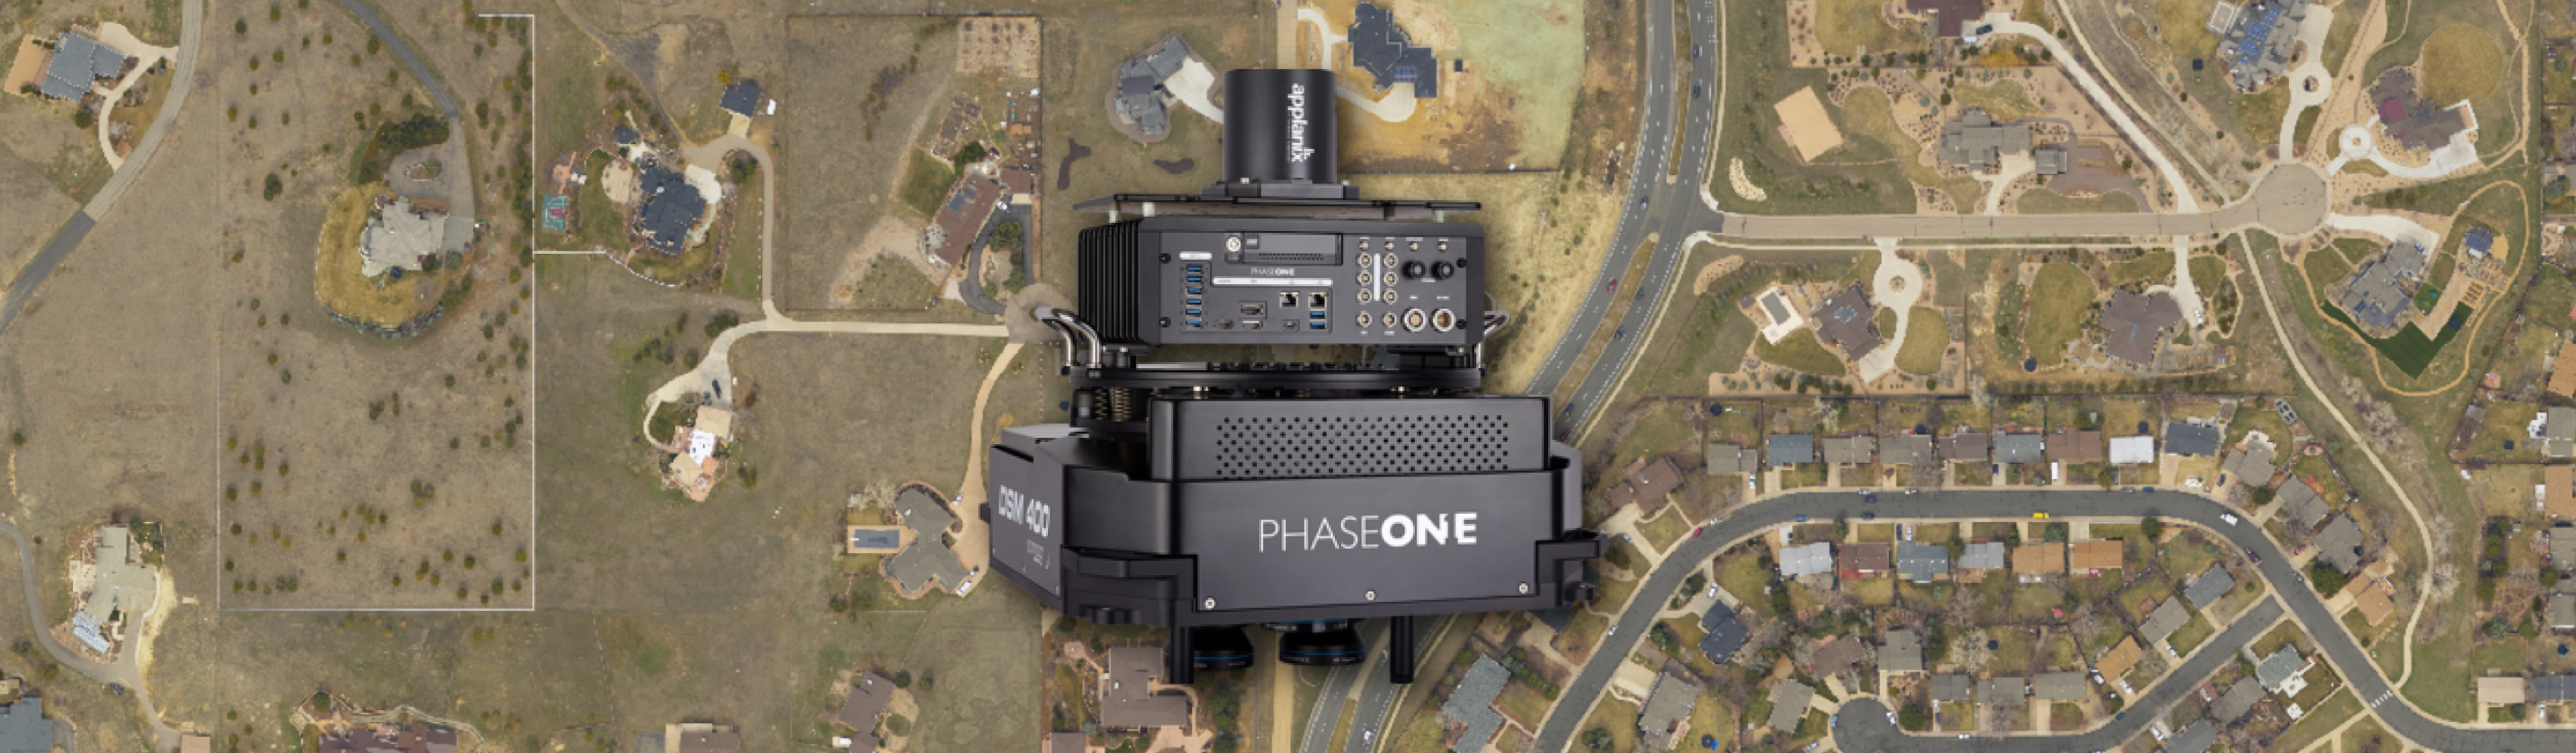 SimActive Used with Phase One Cameras for Precise Photogrammetry